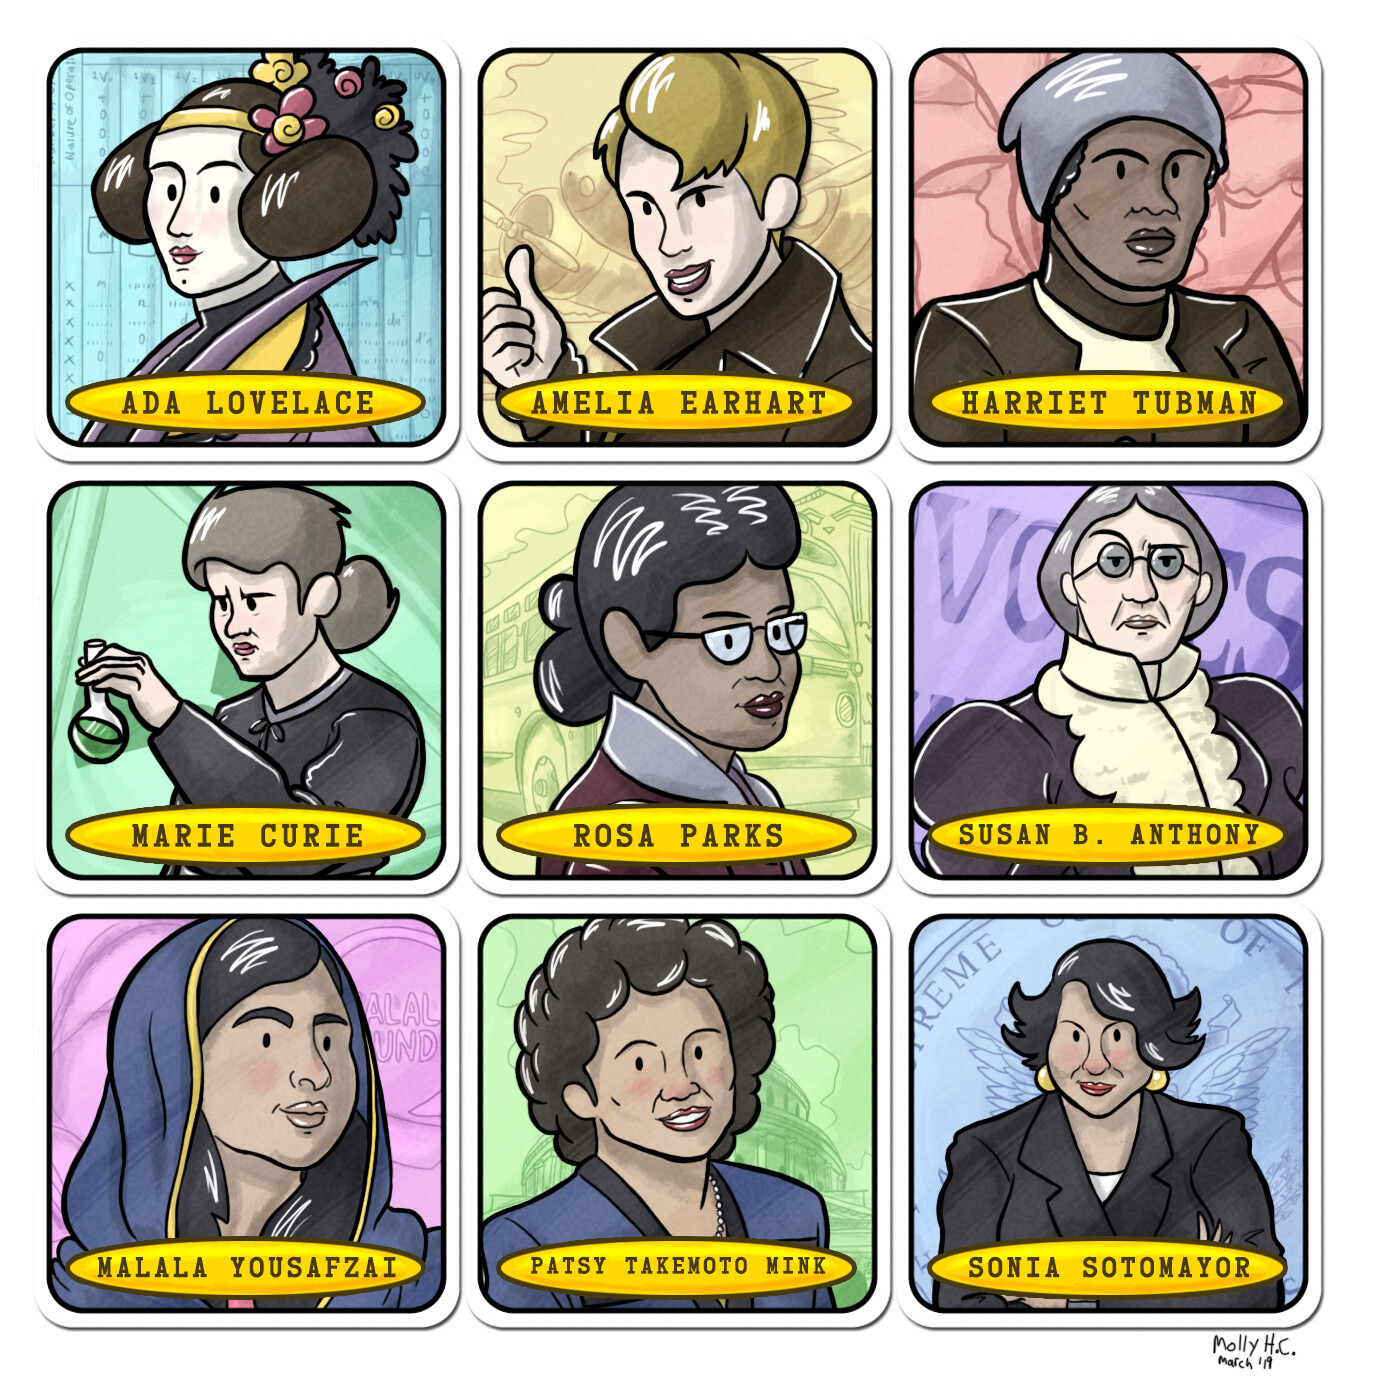 Women's History Month Matching Card Game Illustrations 
Commissioned by Fifth Tribe Studios.
(http://womenshistory.marlofurniture.com/)
©2019